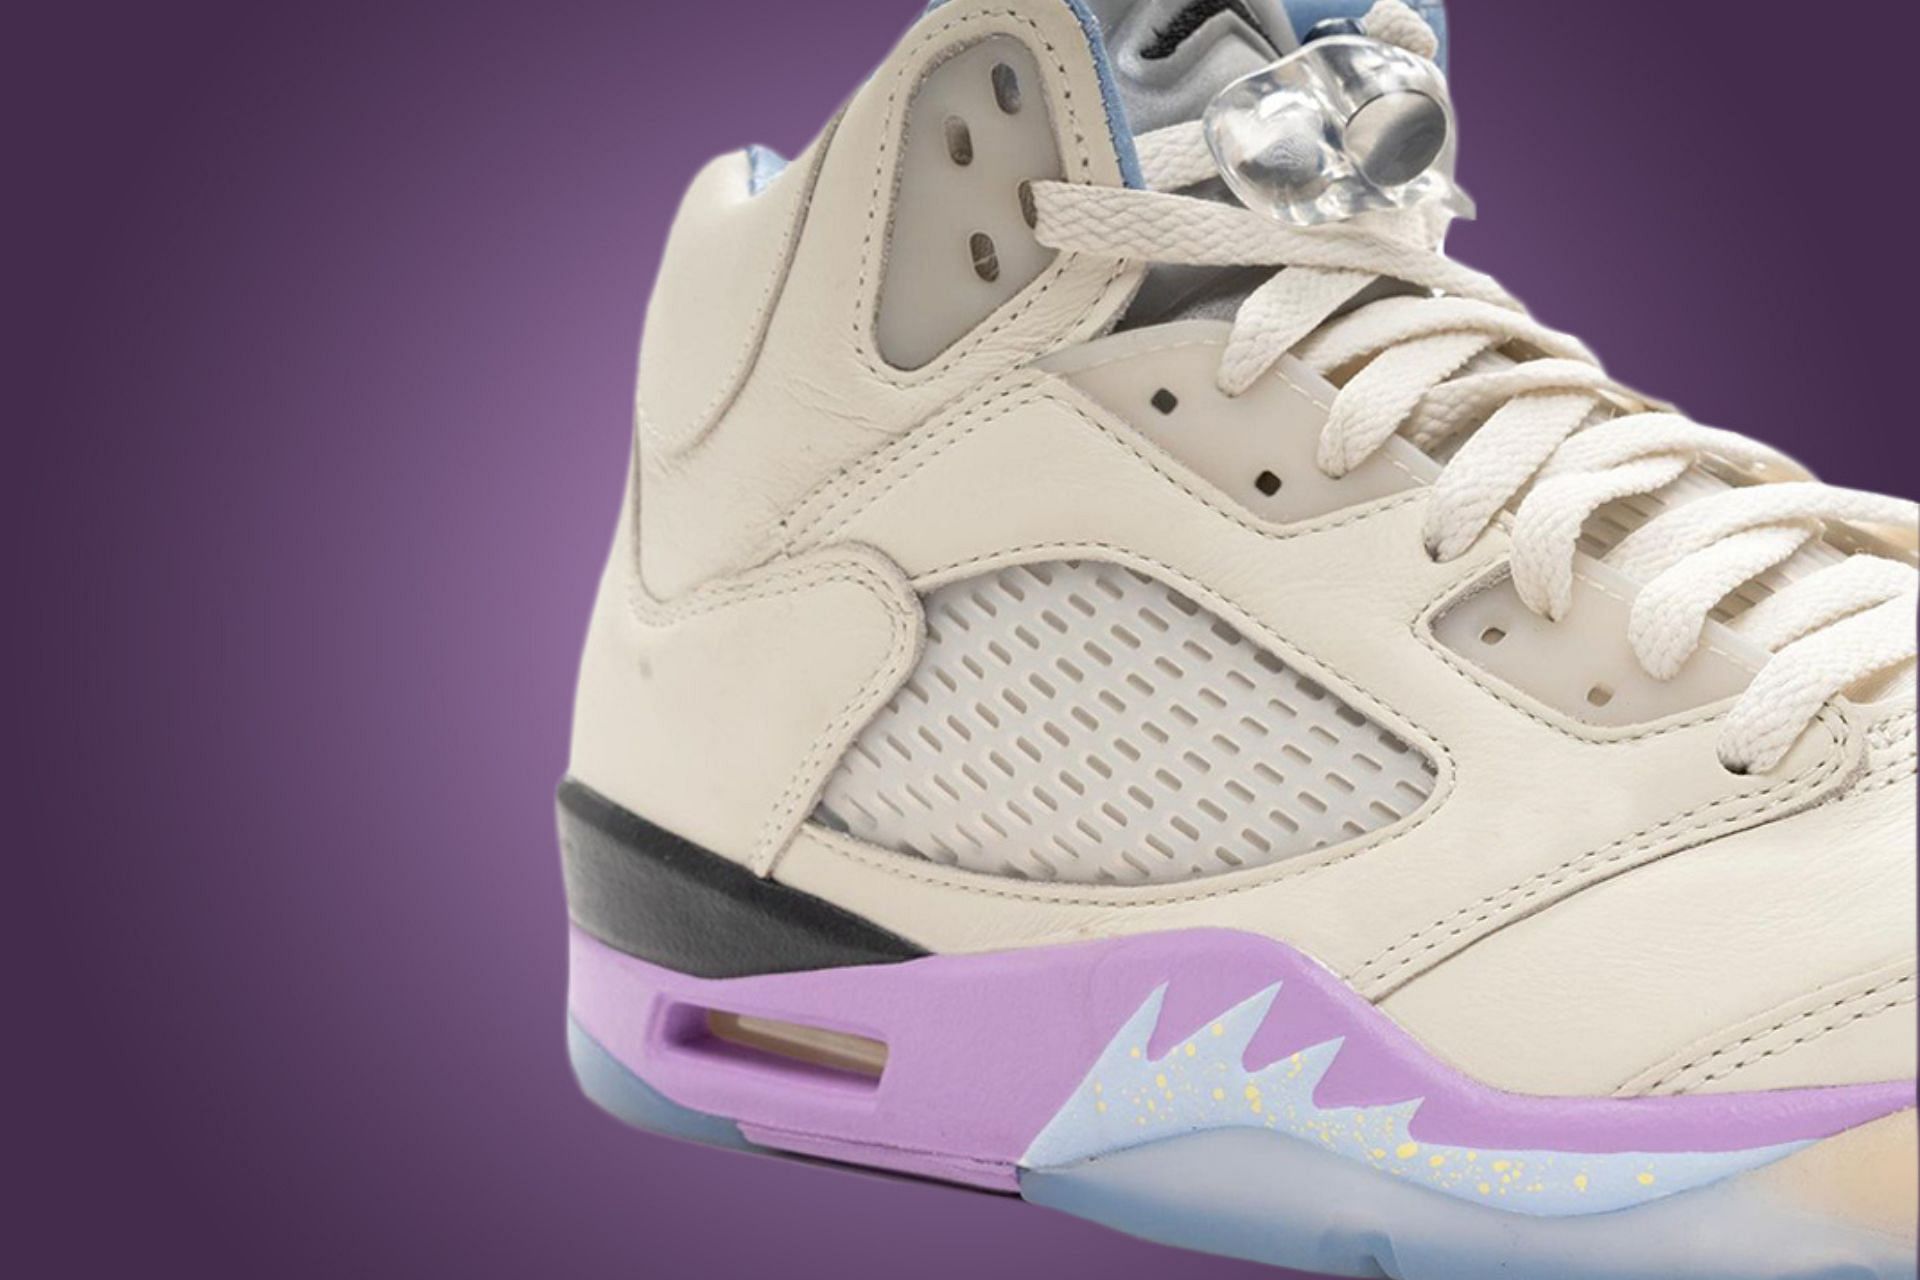 Where to buy DJ Khaled x Air Jordan 5 We The Best “Sail” shoes? Price,  release date, and more details explored